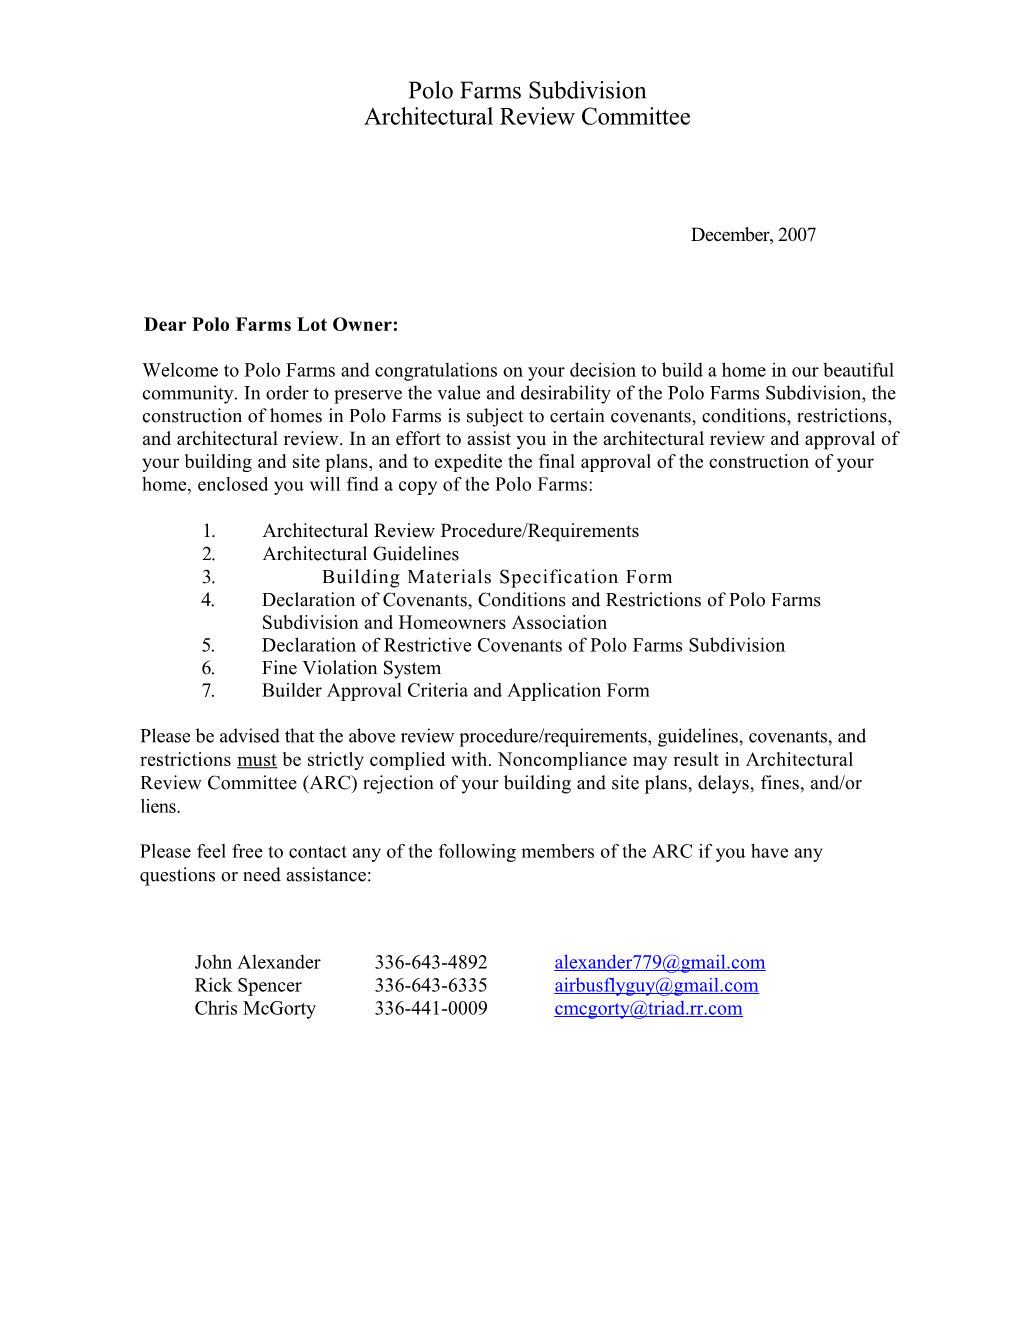 Polo Farms Subdivision Architectural Review Committee